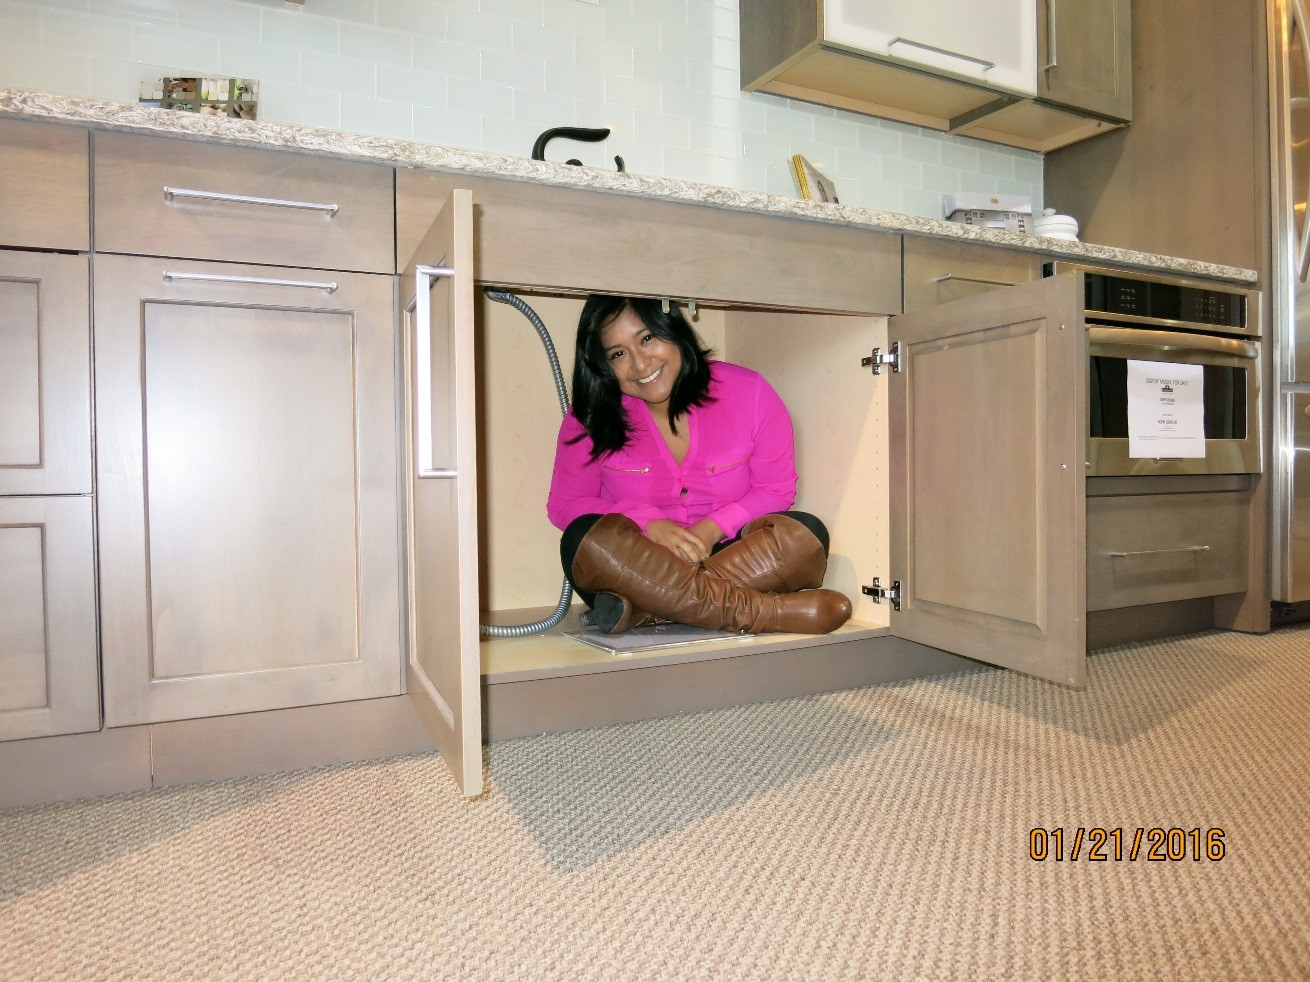 In the cabinet5 kitchen cabinets accessories for a sink base